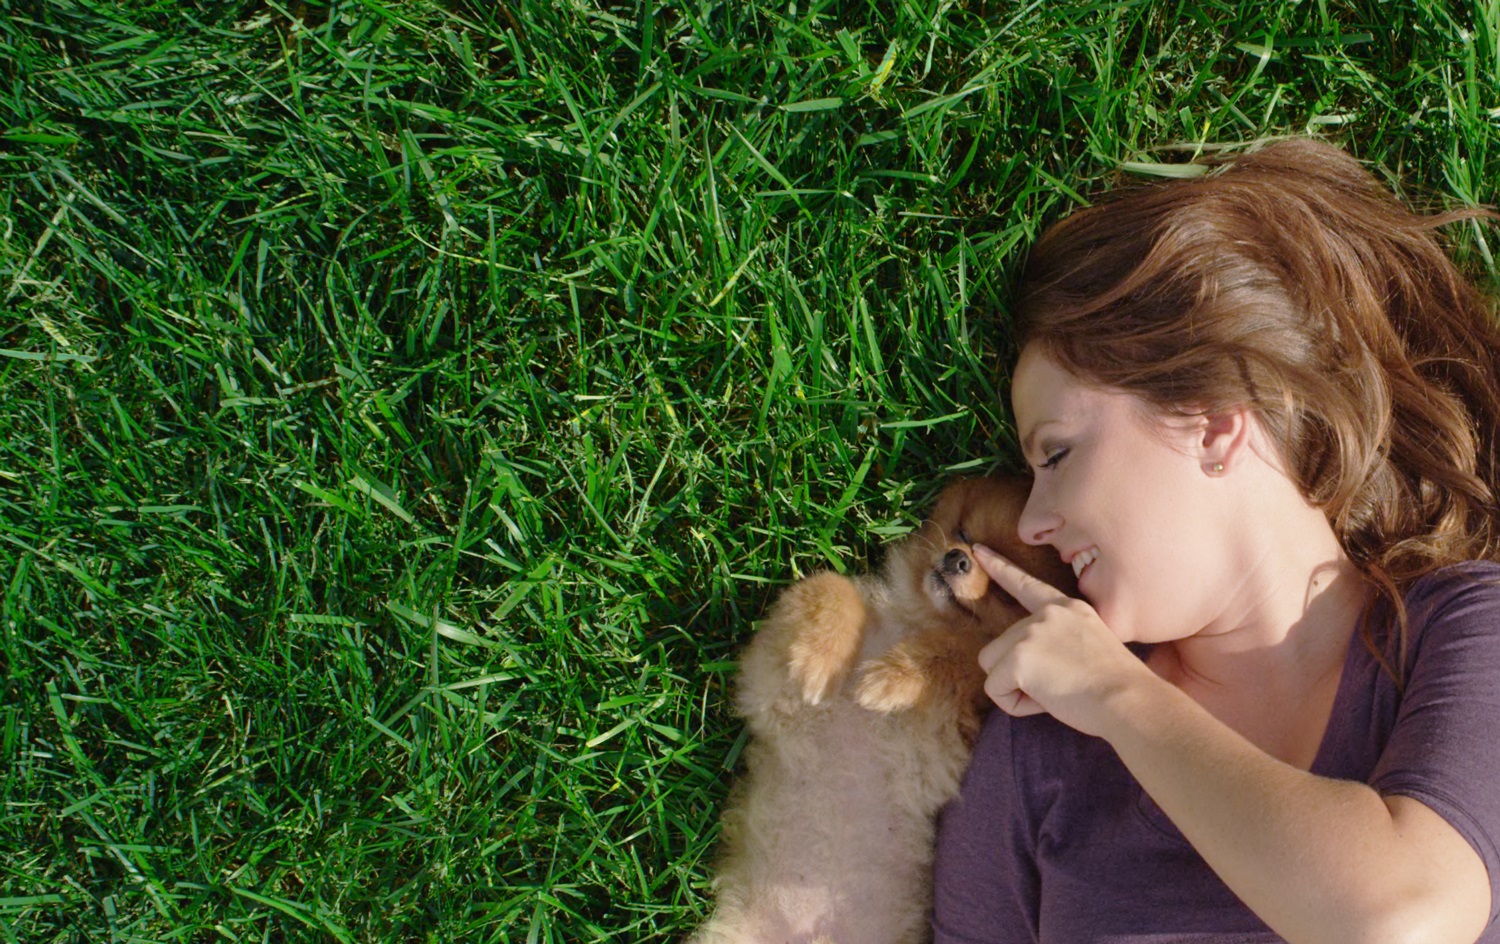 Pretty Woman playing with cute puppy on manicured green grass showing lawn care in Oxford